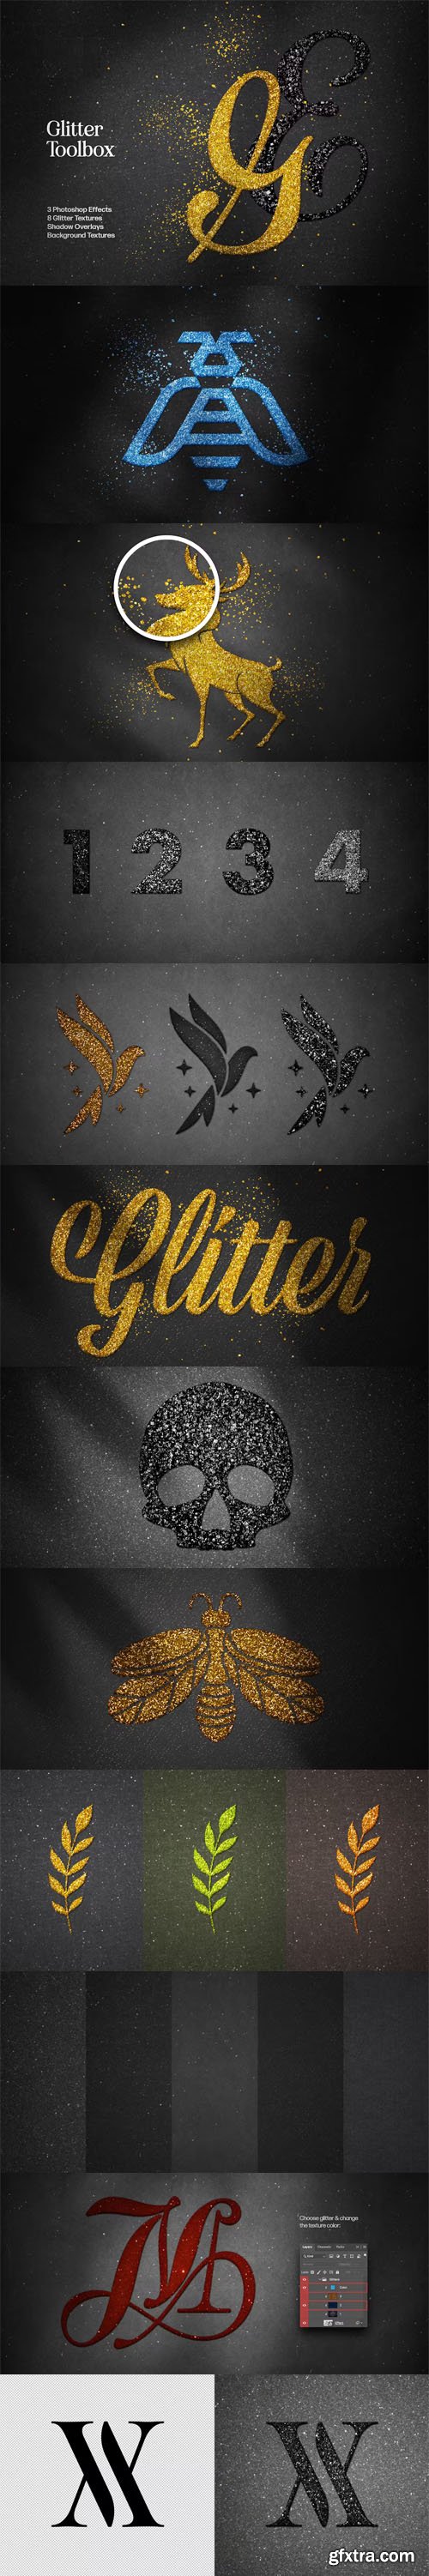 Glitter Toolbox - Photoshop Effects Collection [Re-Up]